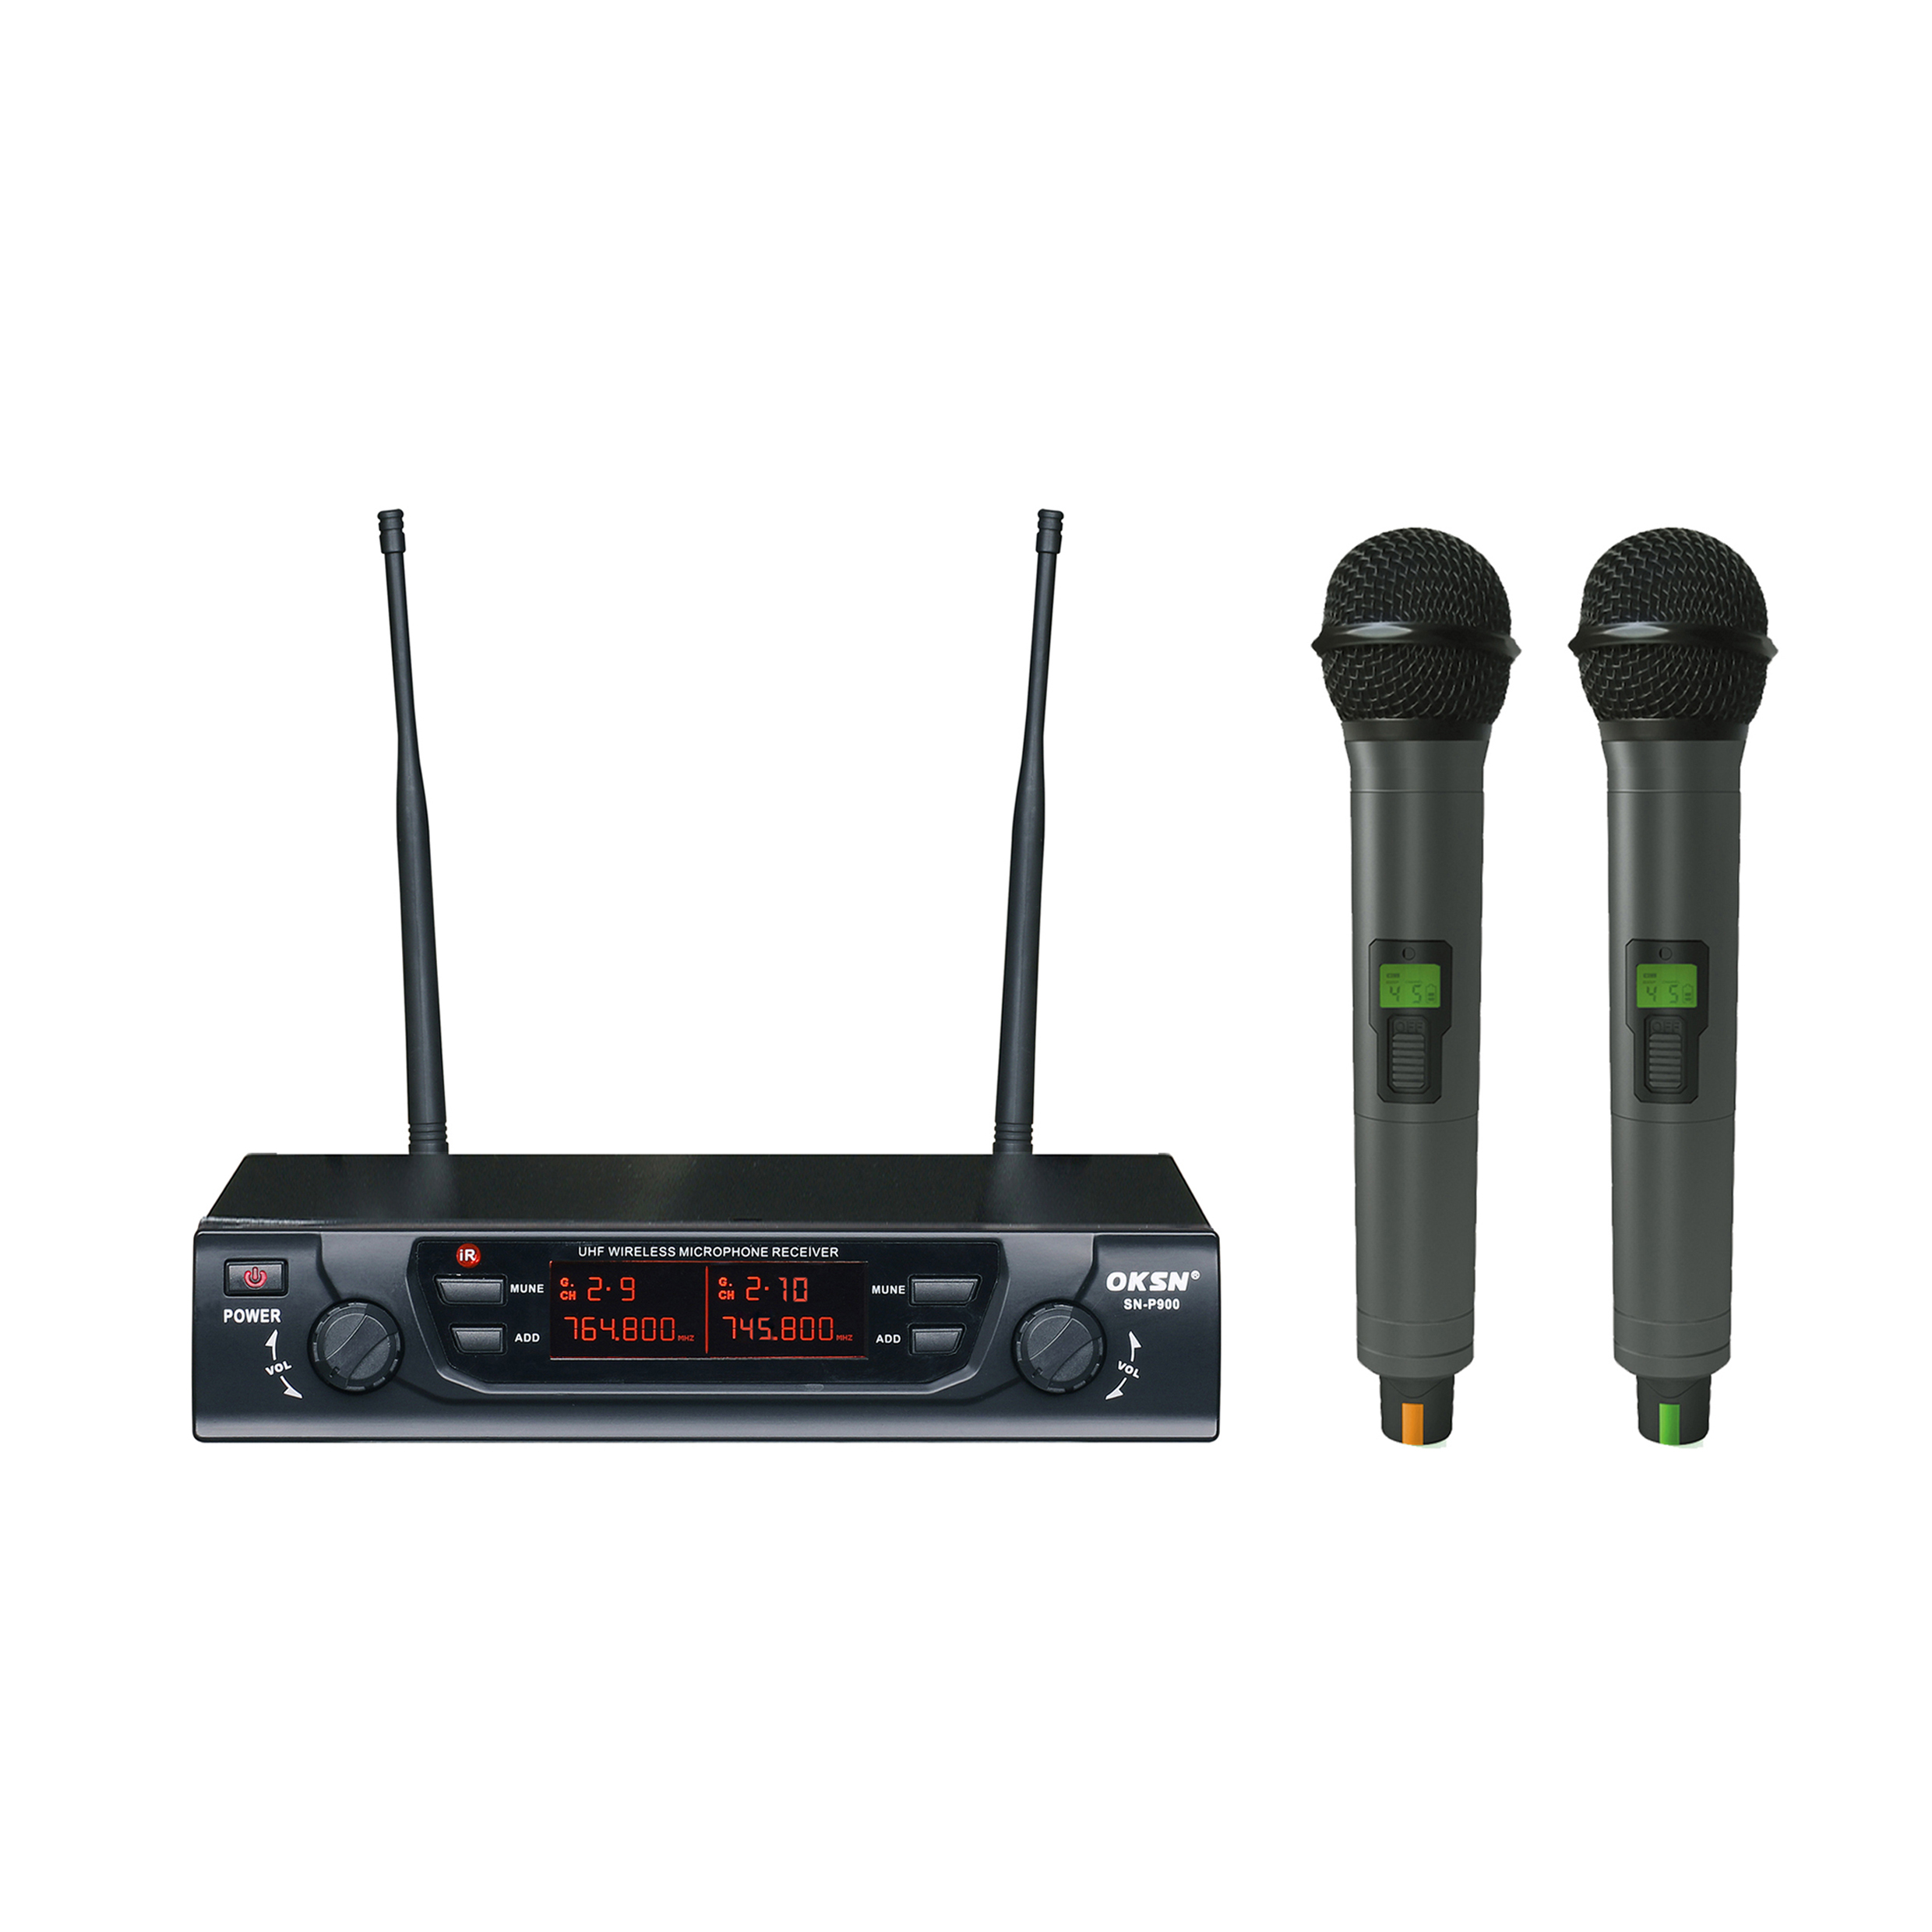 Luxury High Quality SN-P900 Dual Channels Karaoke UHF Wireless Microphone System Manufacturers